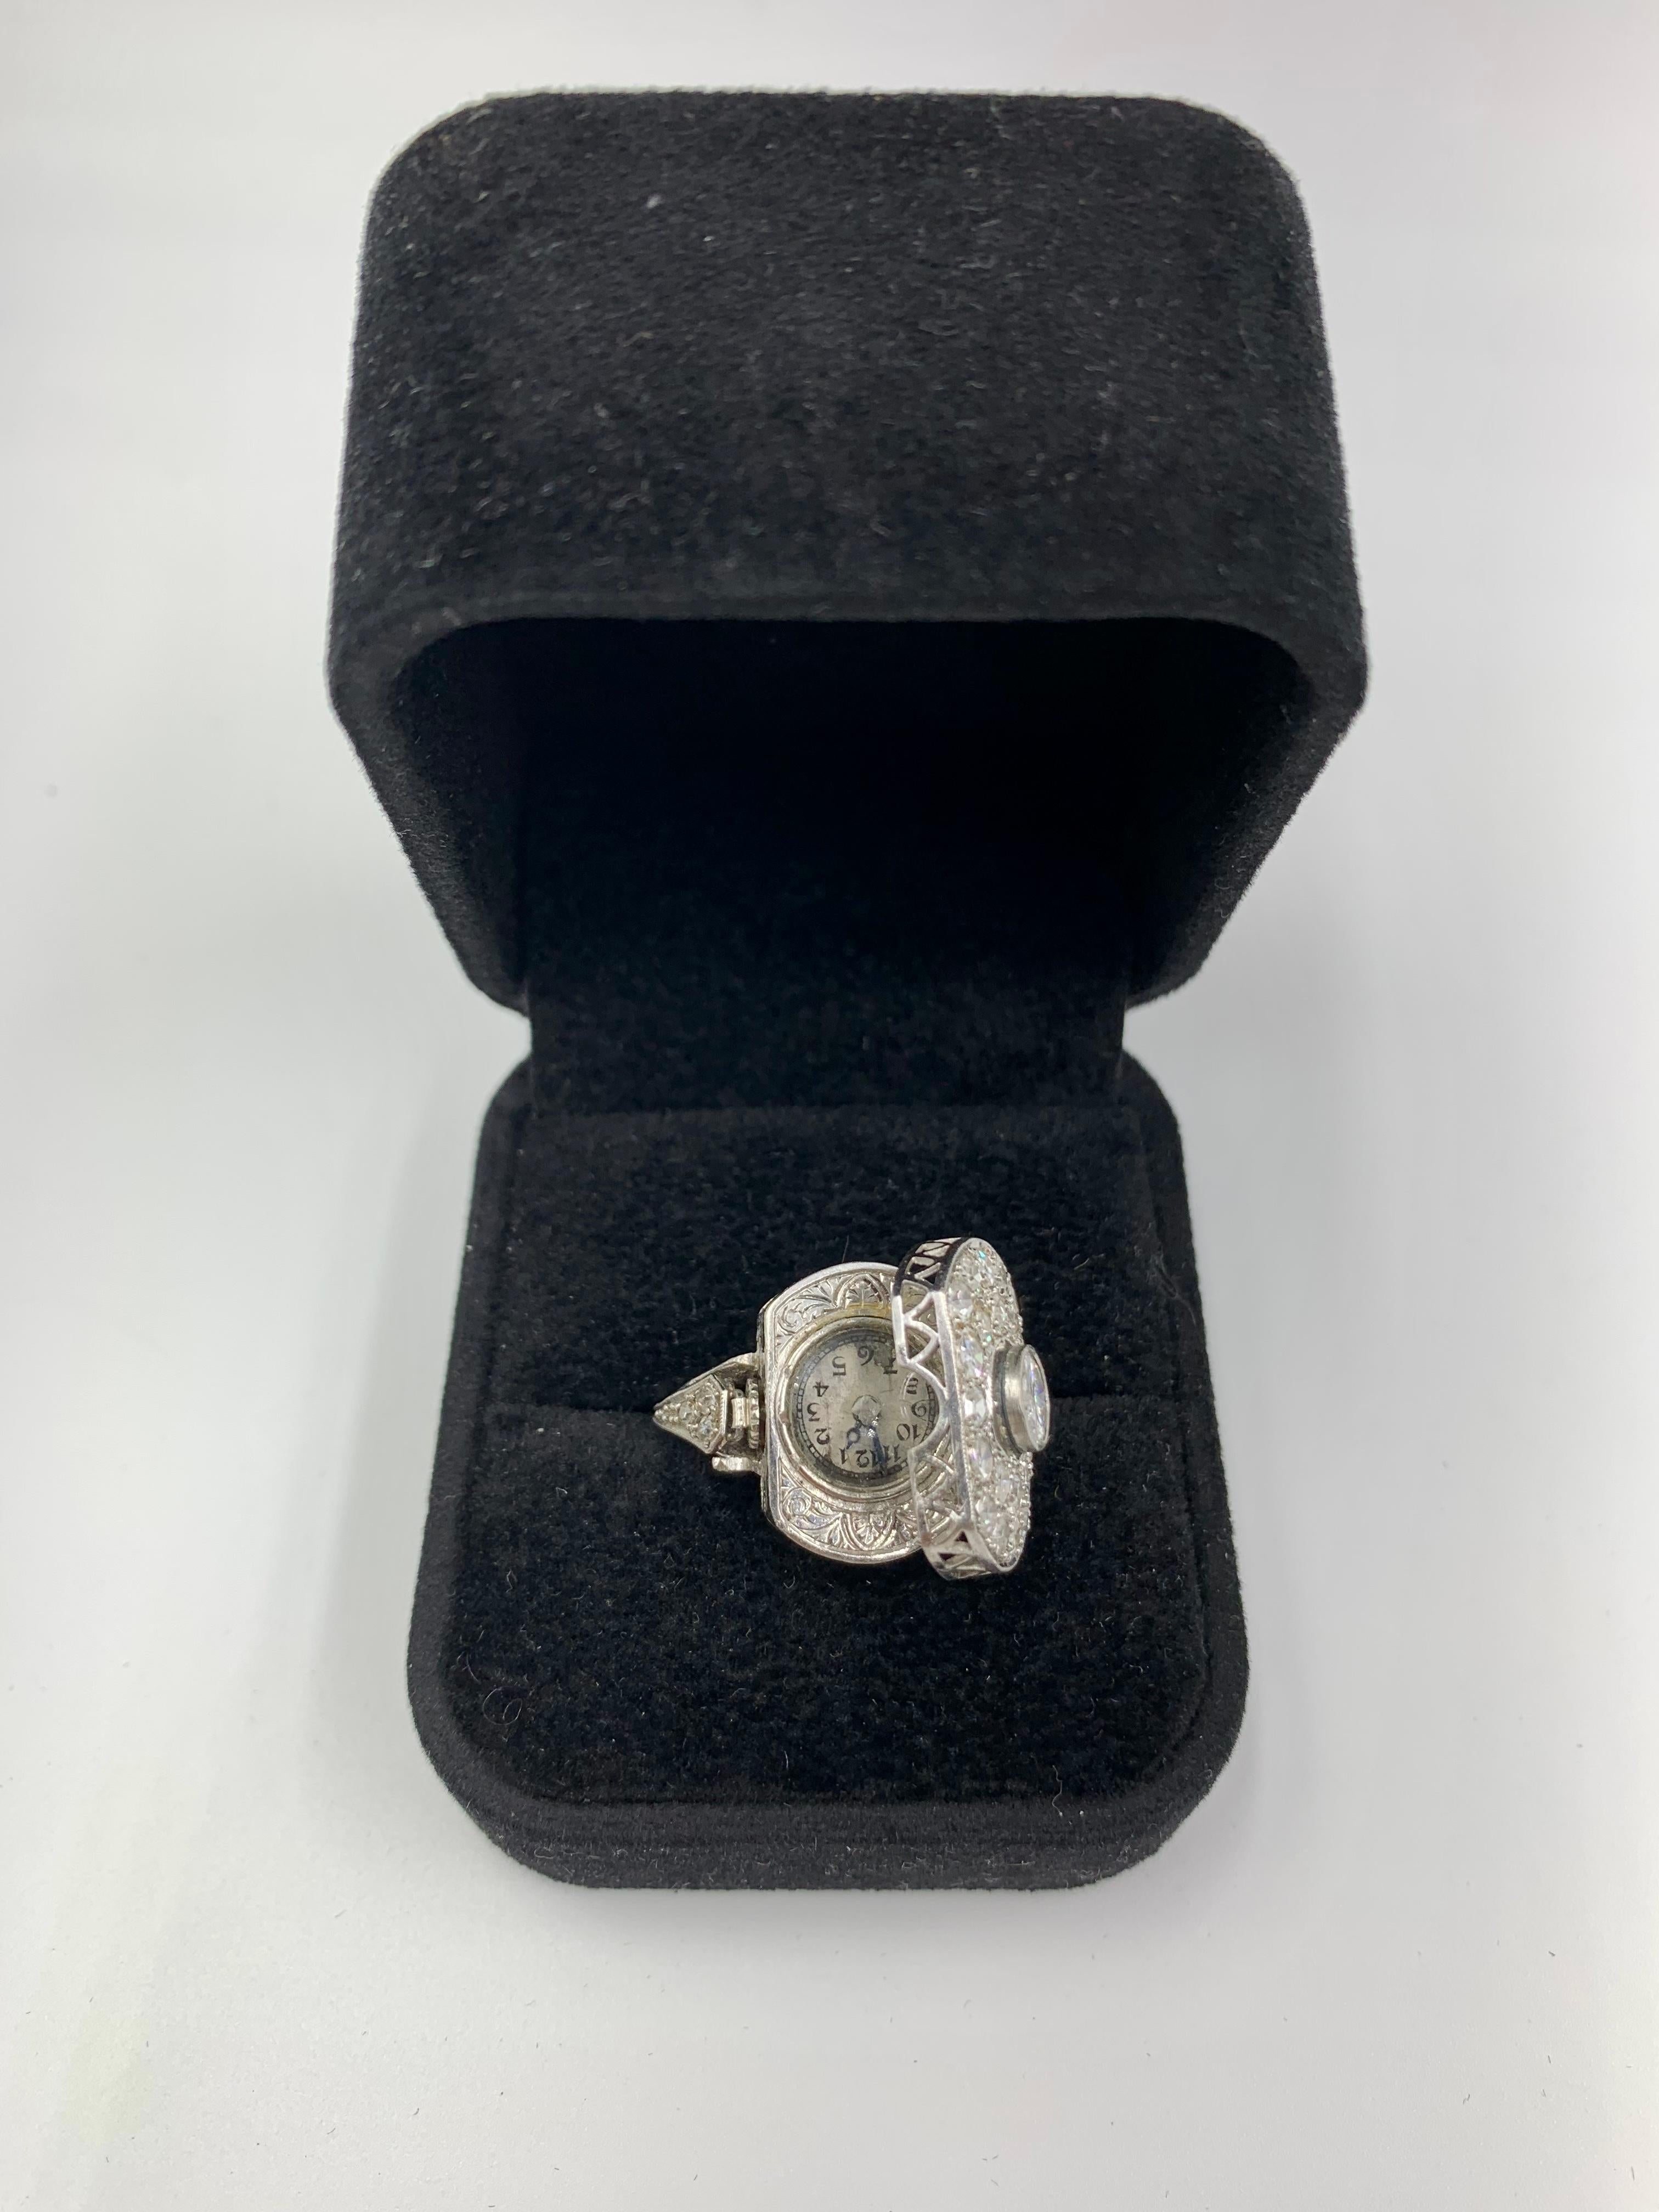 Rare Art Deco 2.30 TCW Diamond 14K White Gold Cocktail Ring with Concealed Watch In Good Condition For Sale In New York, NY